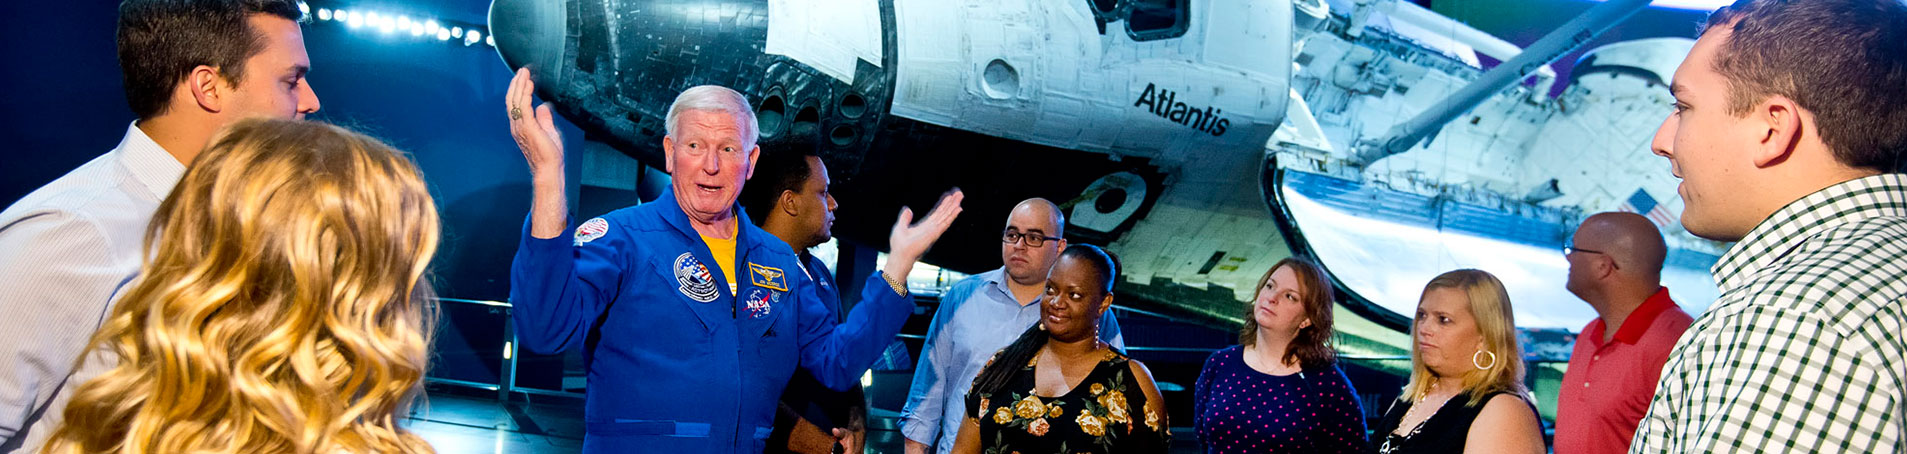 Include a unique experiences in your corporate event, such as a private tour with an astronaut.